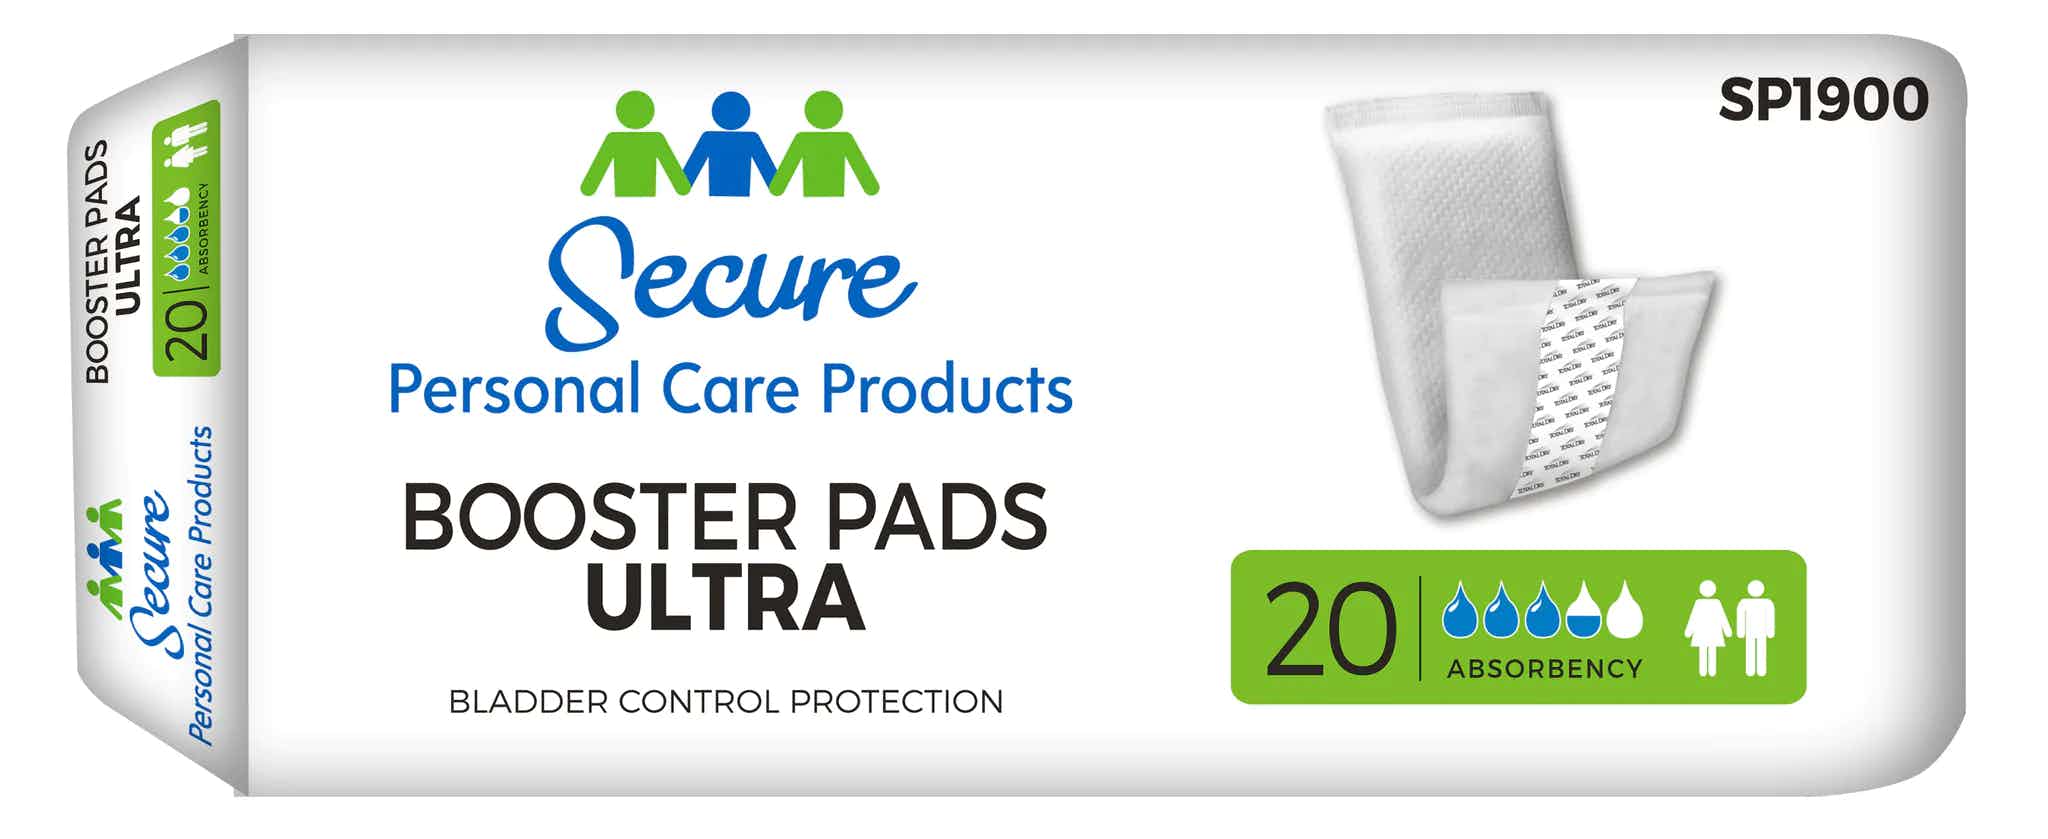 Secure Personal Care Products Booster Pads Ultra, Extra Absorbency, SP1900, Bag of 20